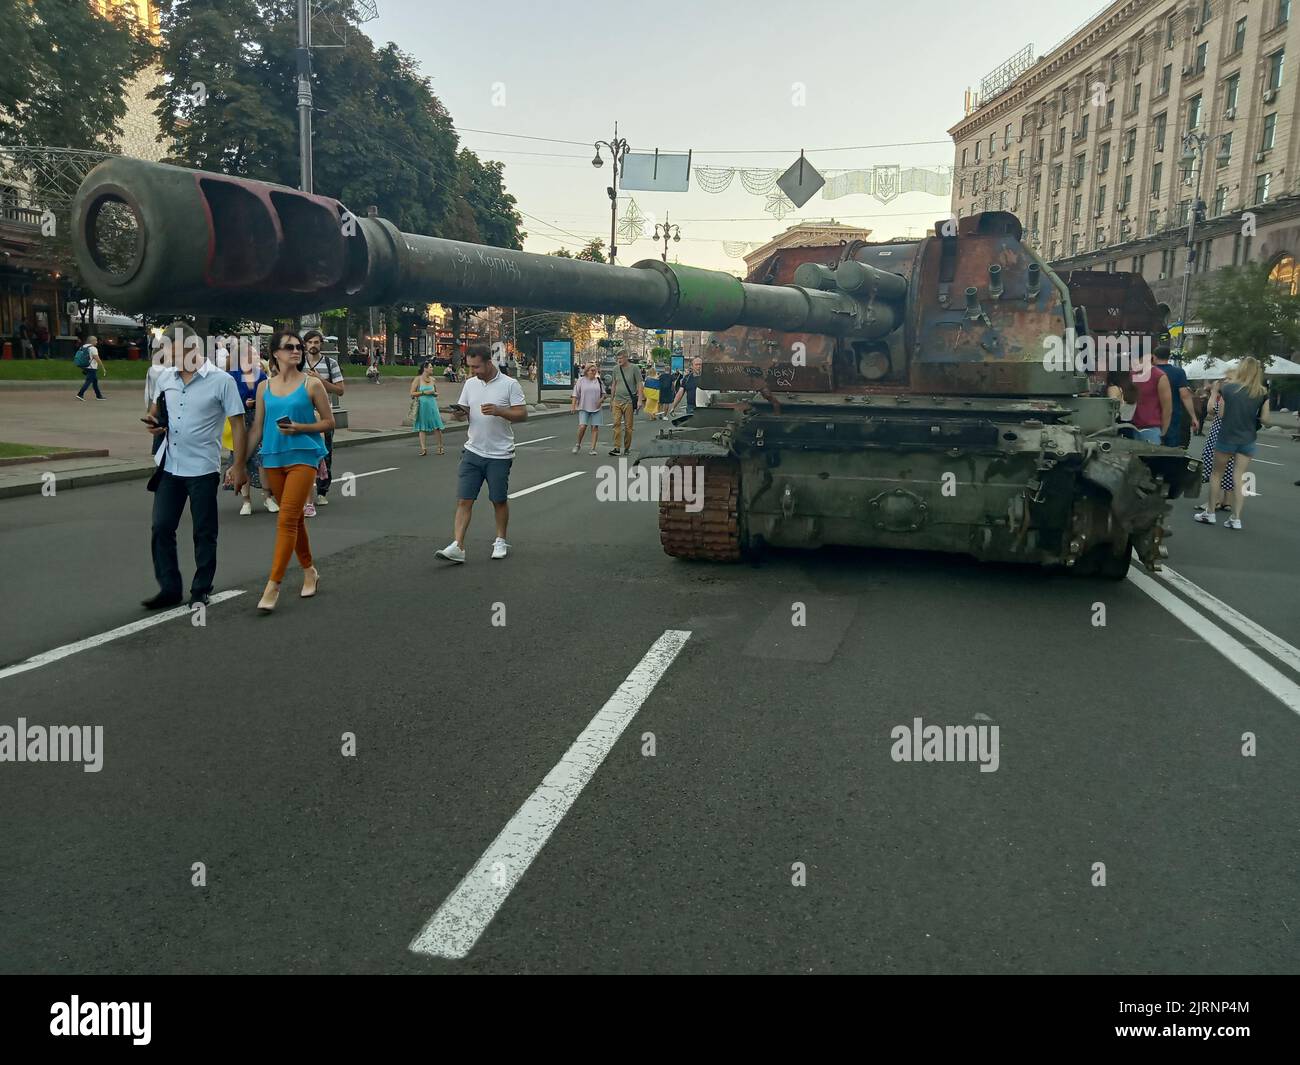 Destroyed military vehicle exhibition on Khreschatyk street on August 24, 2022 during Independence Day in Kiev, Ukraine. Visitors reviewed the broken and burned modern Russian armored cars, tanks etc. Credit: FMUA/Alamy Live News Stock Photo